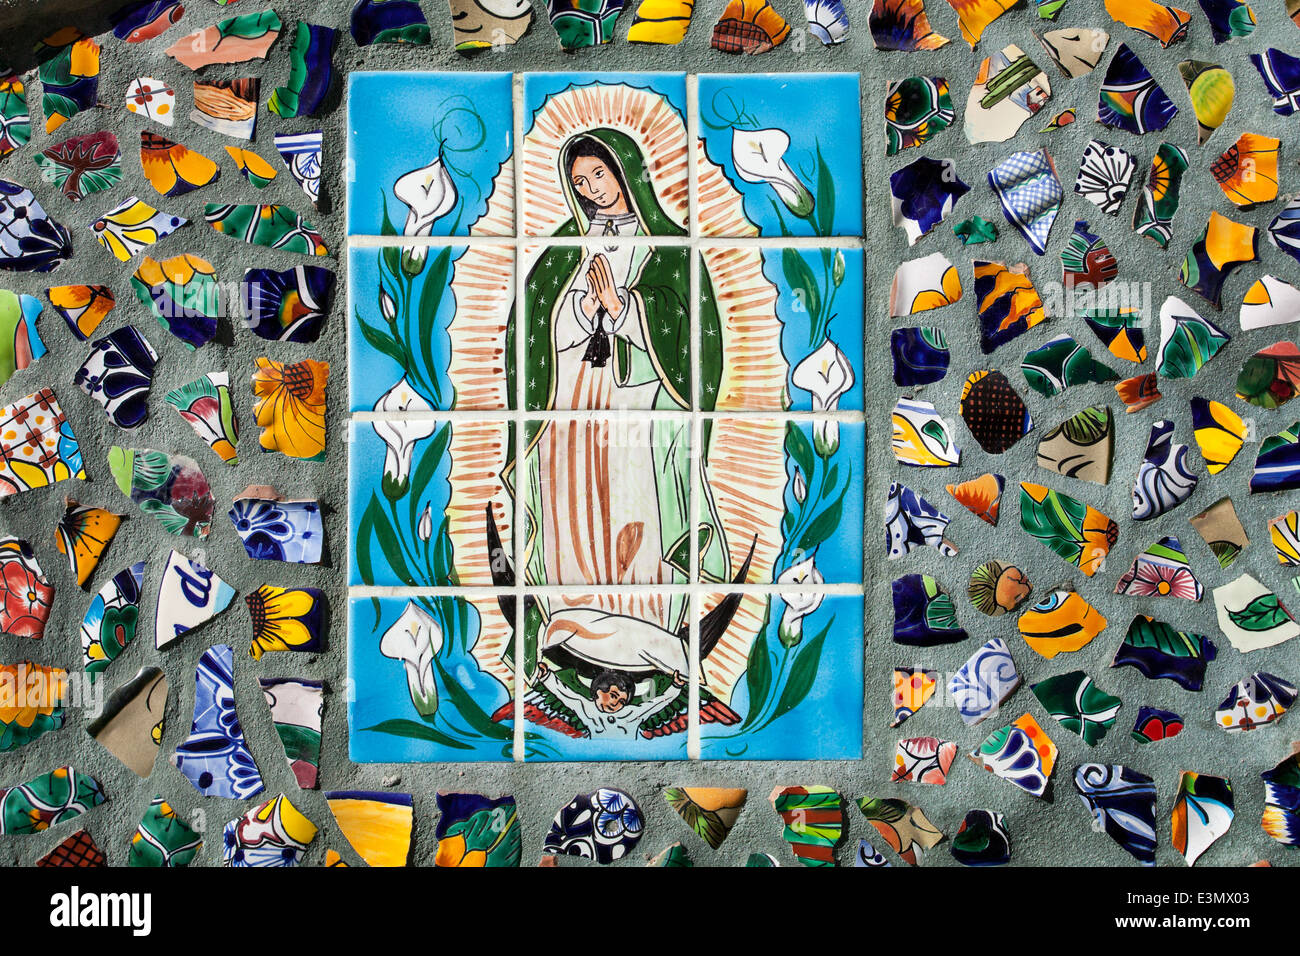 A tile painting of the Virgin of Gualalupe surrounded by broken pieces of tile set in cement, Puerto Vallarta, Jalisco, Mexico. Stock Photo